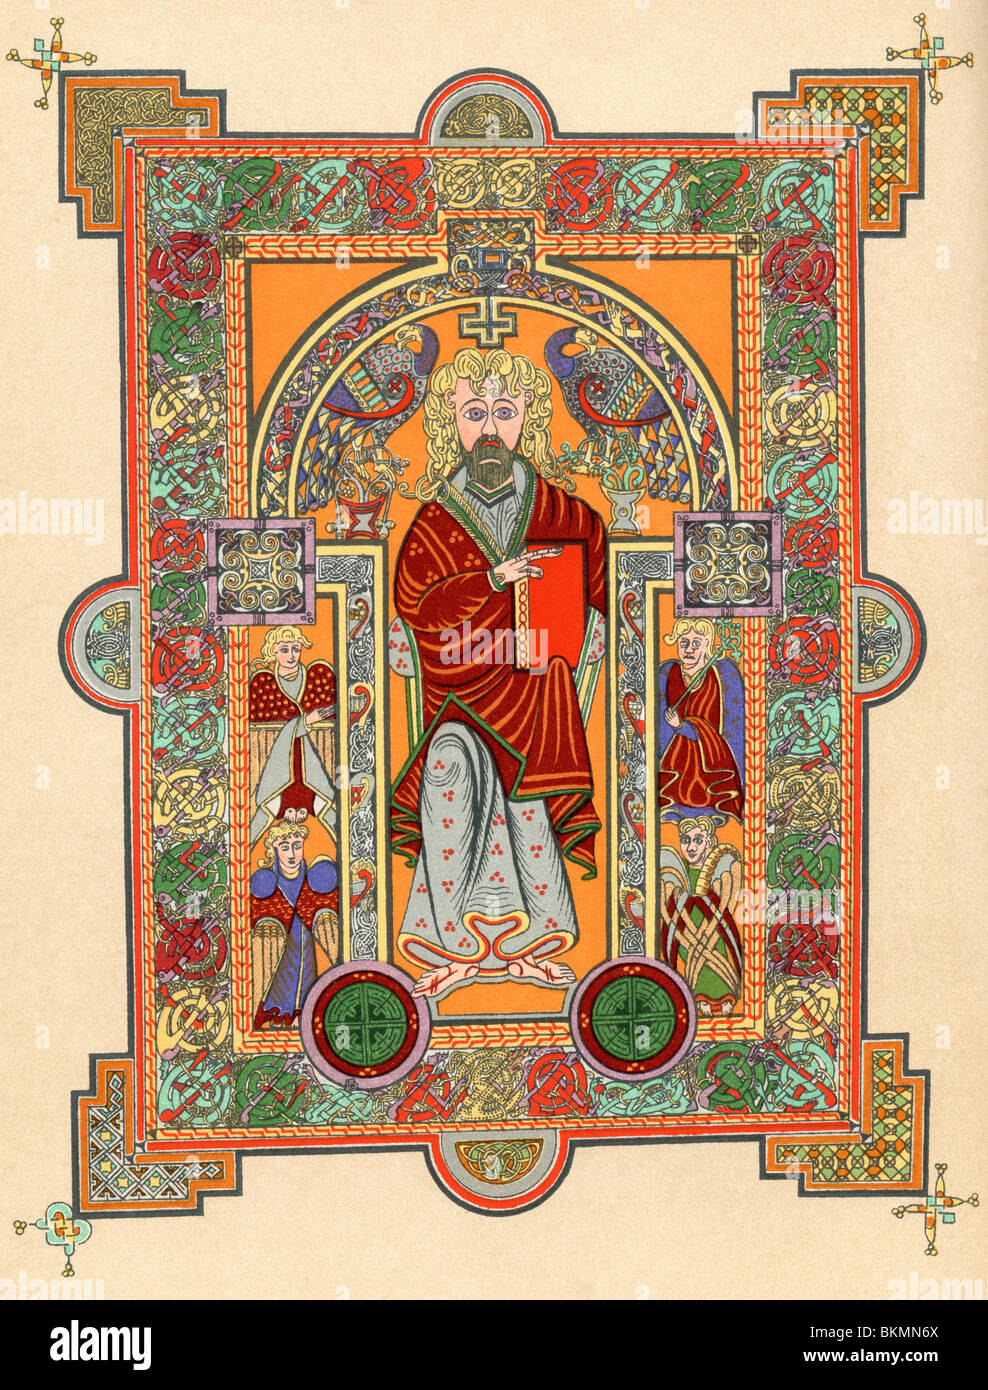 Christ with four angels, introductory page to the Gospel of St. Matthew, from the Book of Kells, c.800. Stock Photo